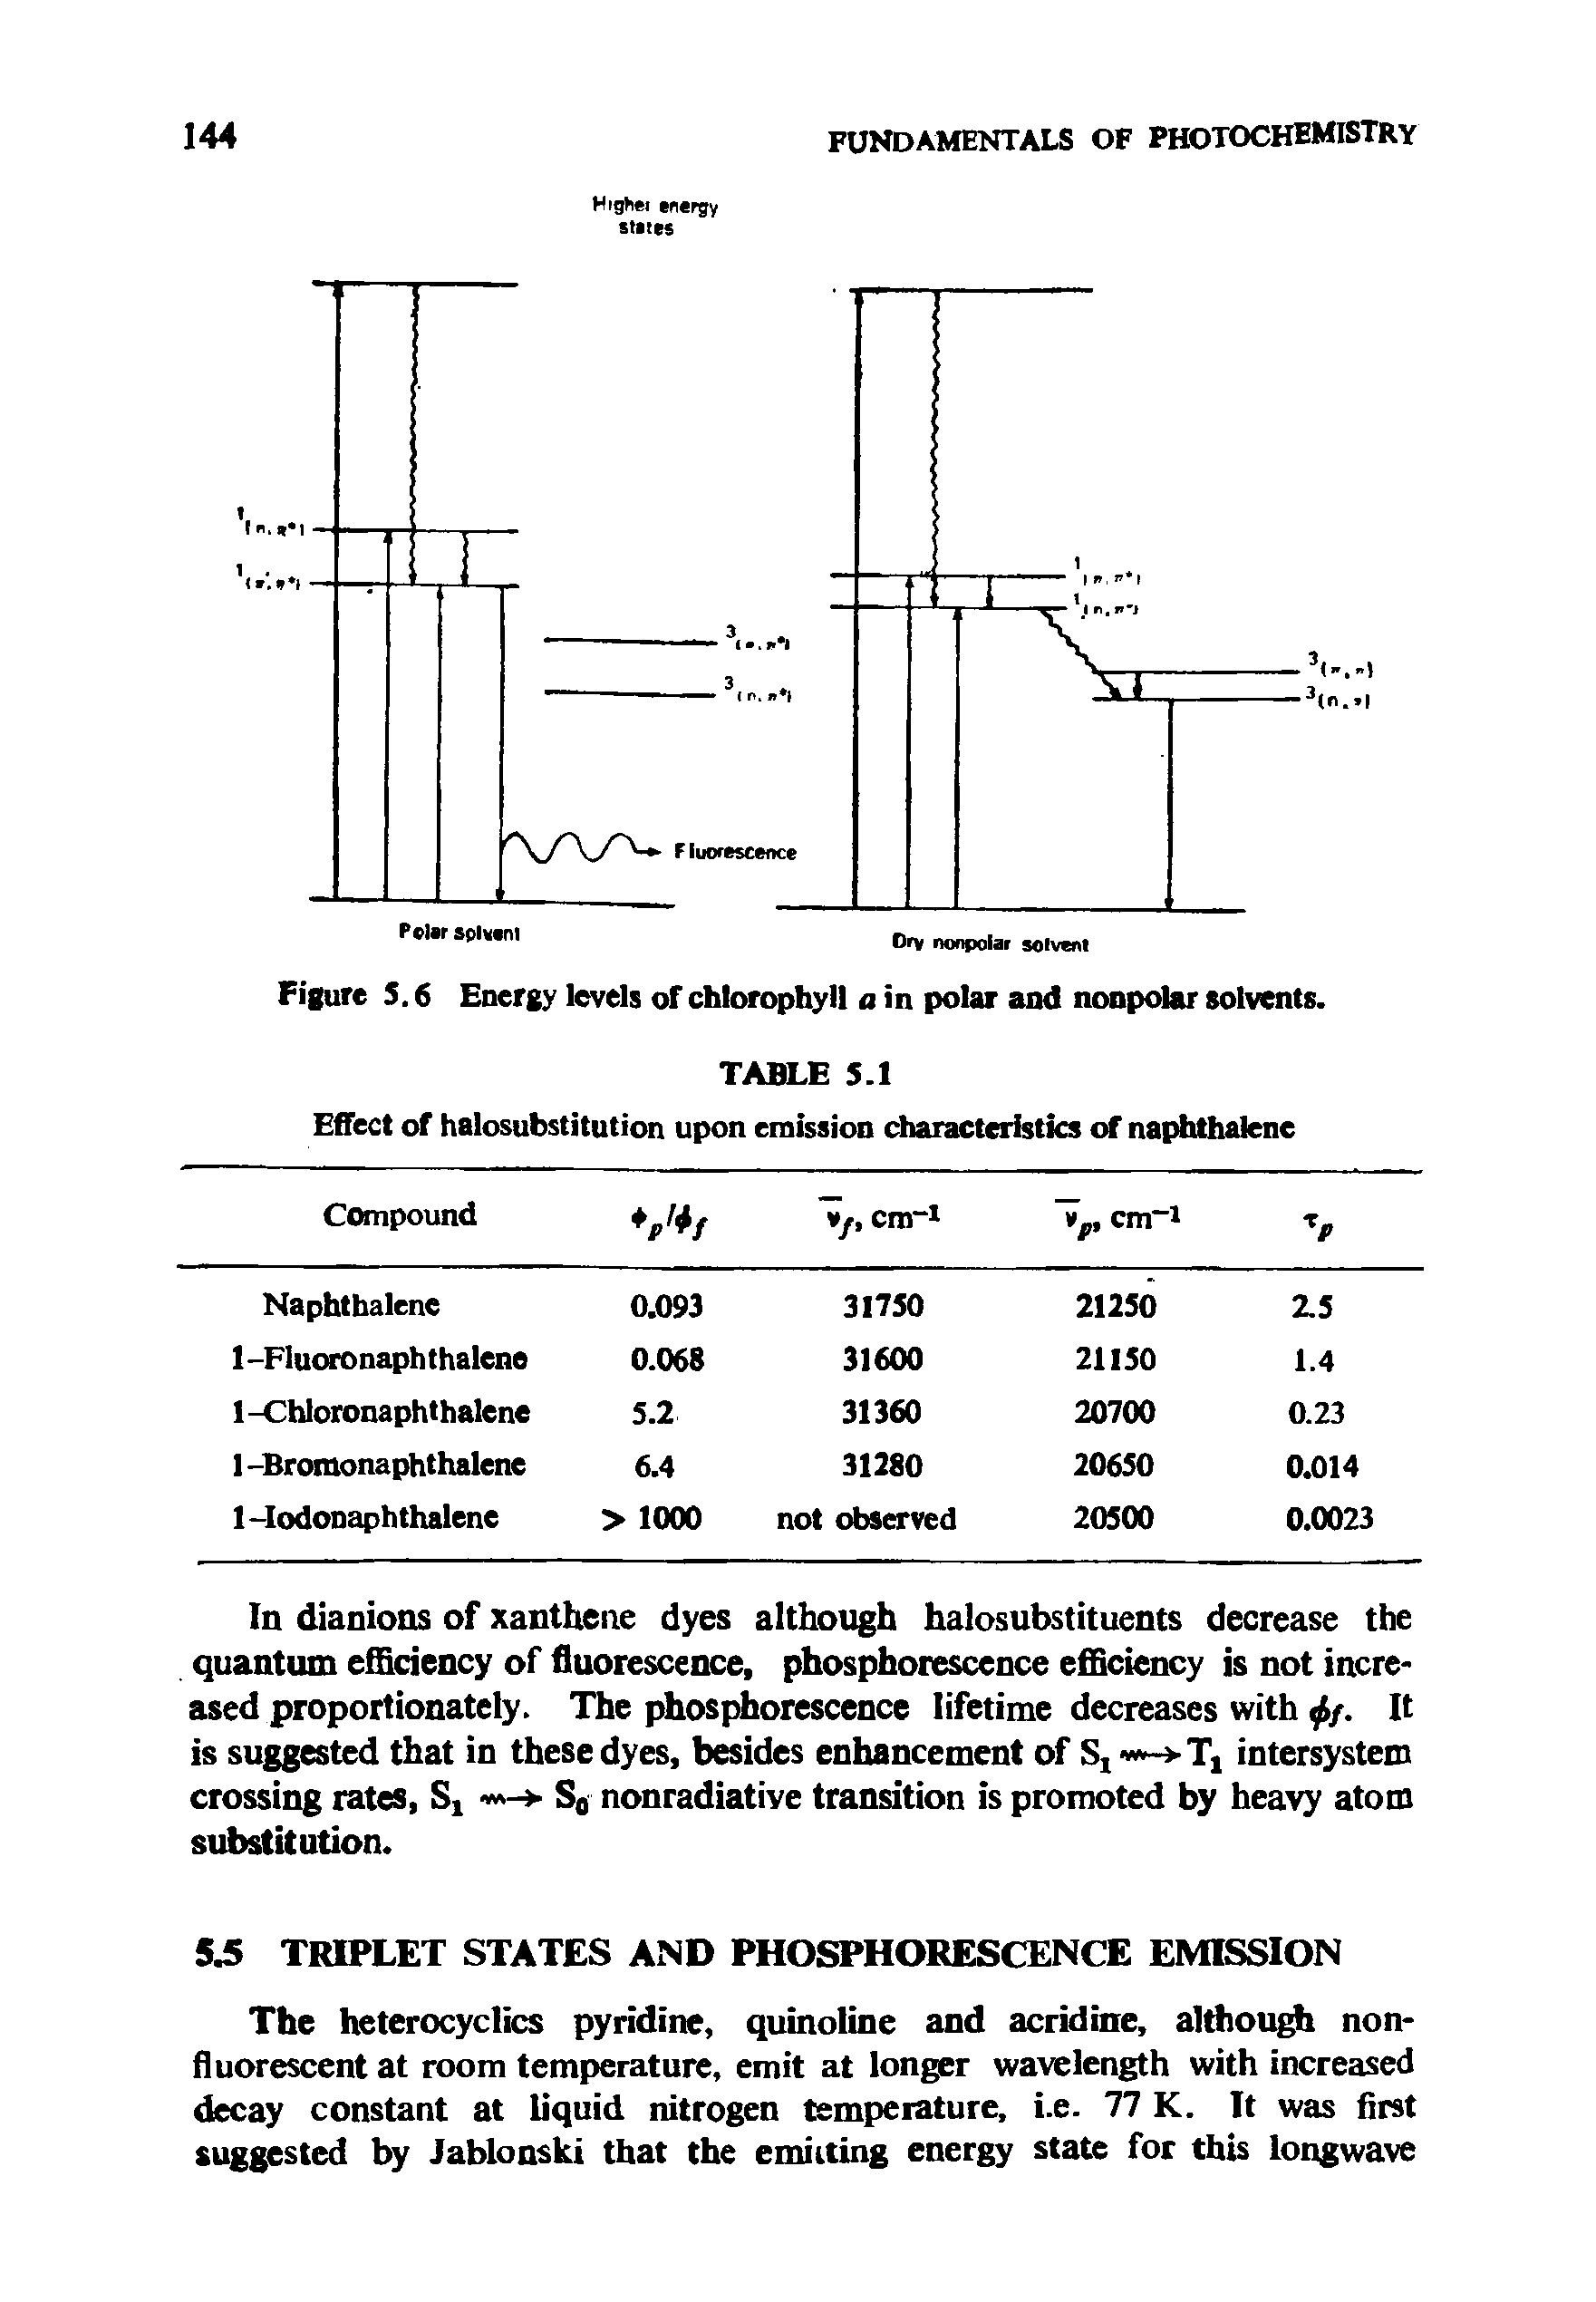 Figure S. 6 Energy levels of chlorophyll a in polar and nonpolar solvents.